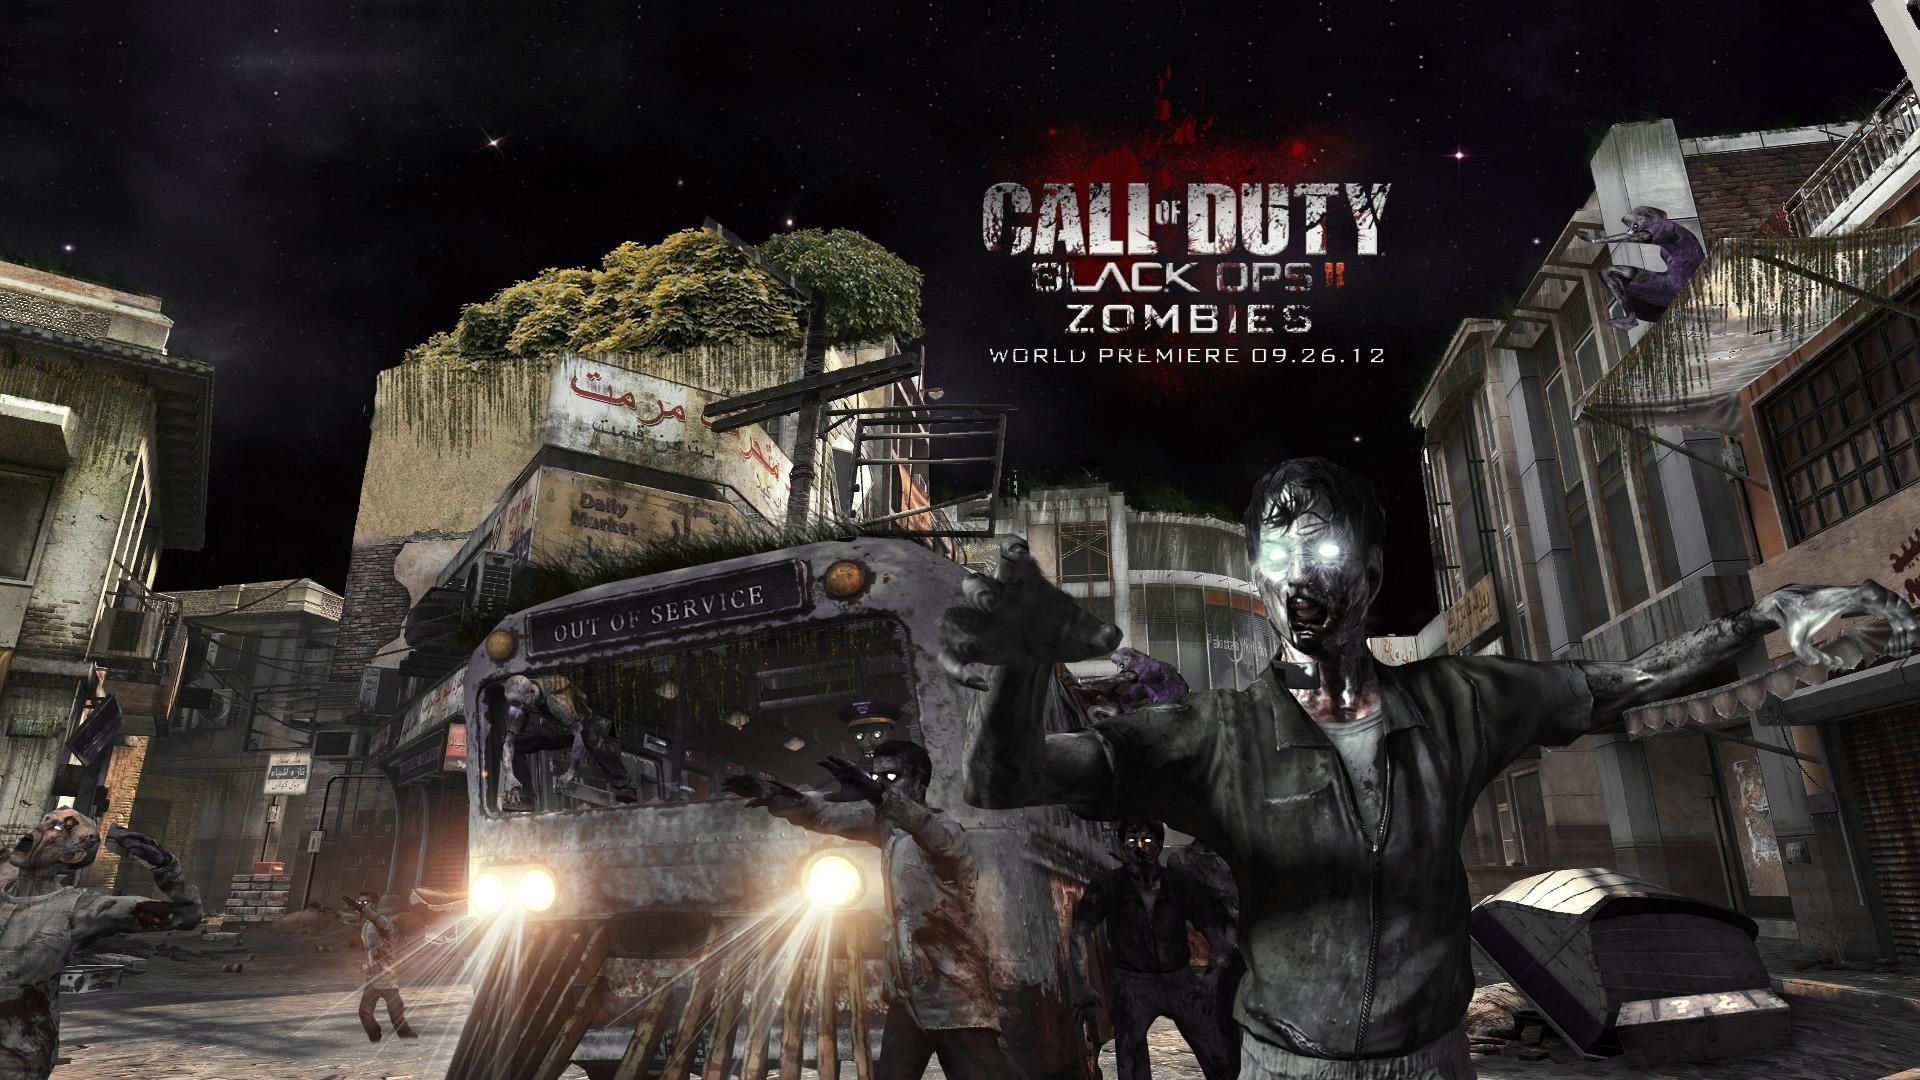 Call Of Duty Black Ops 2 Zombies Wallpaper Hd HD Wallpaper And ...